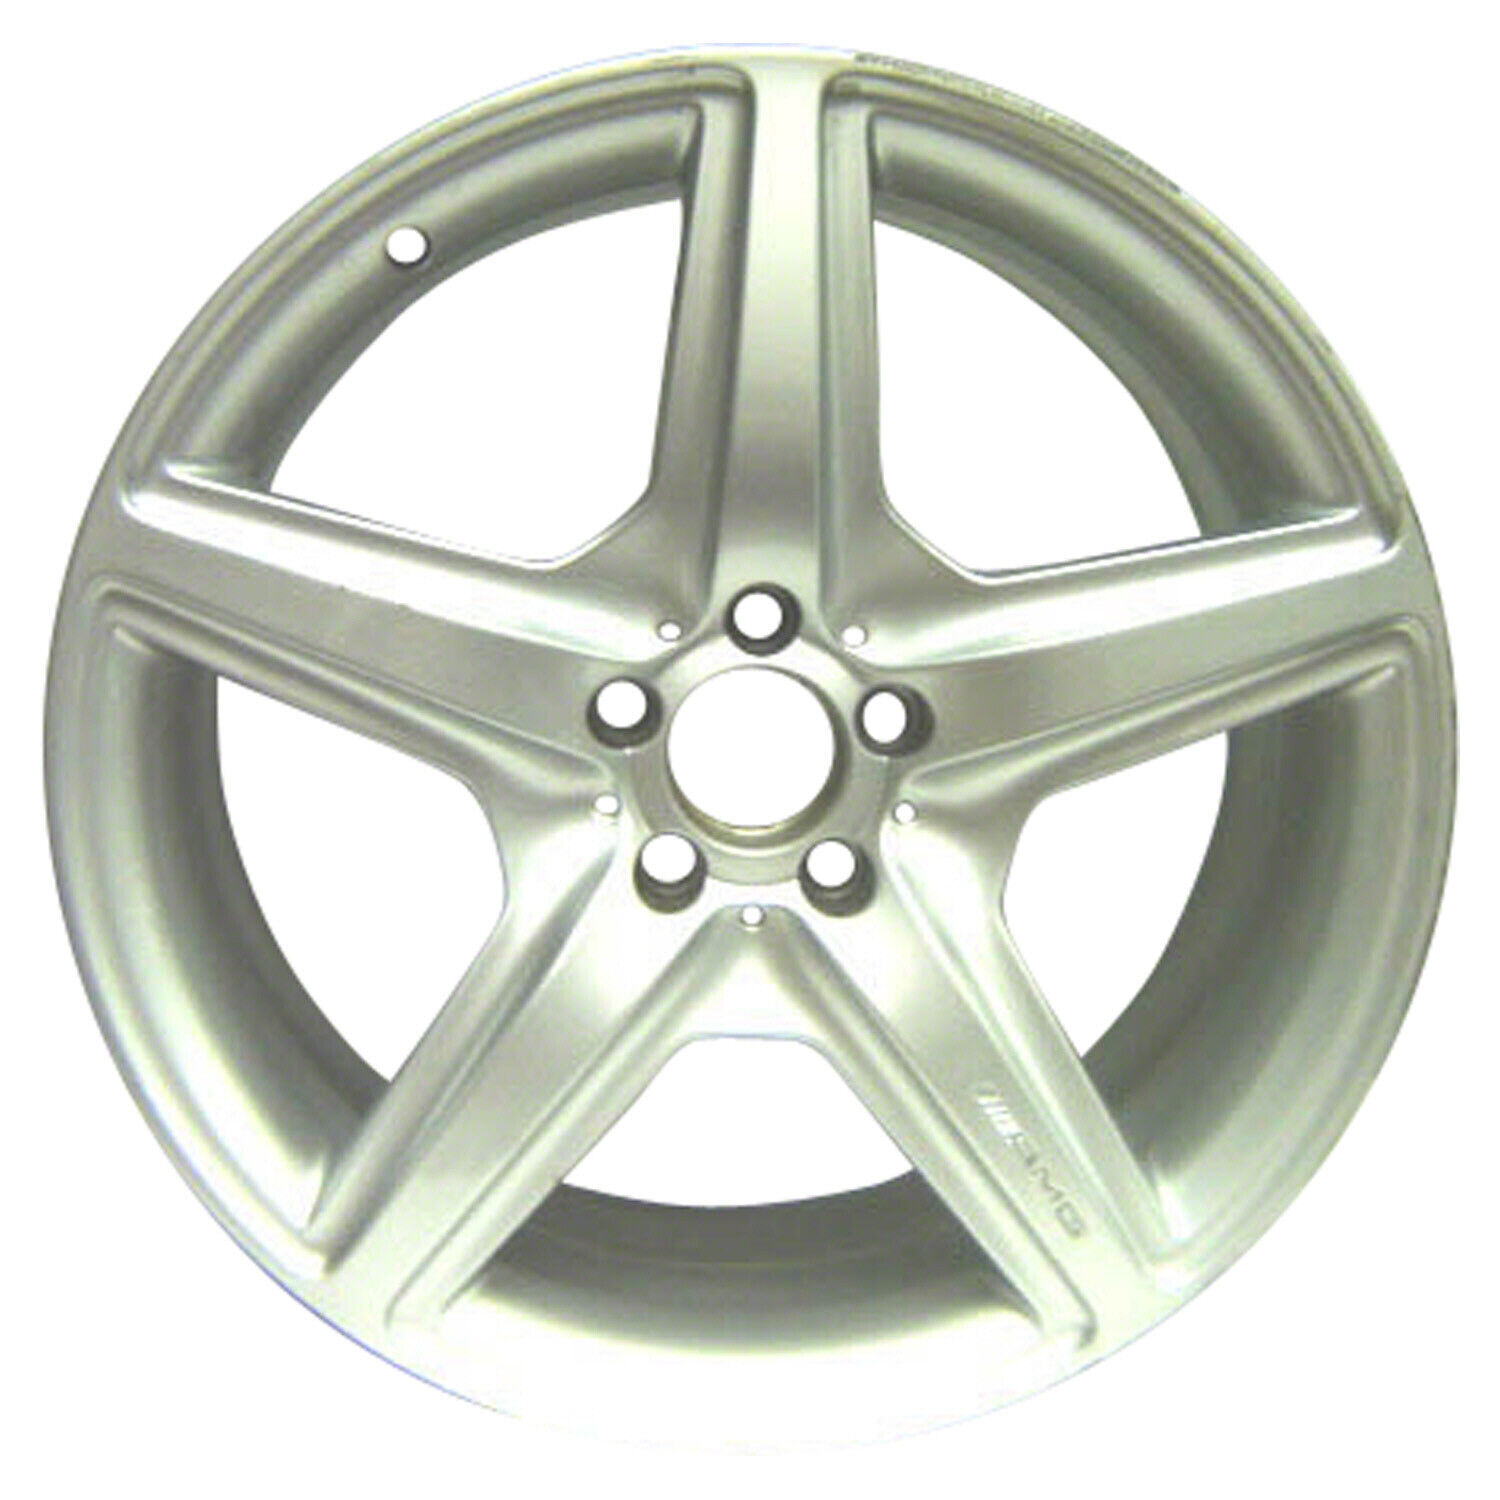 Refurbished 20x9.5 Painted Silver Wheel fits 2008-2011 Mercedes Cl63 Amg